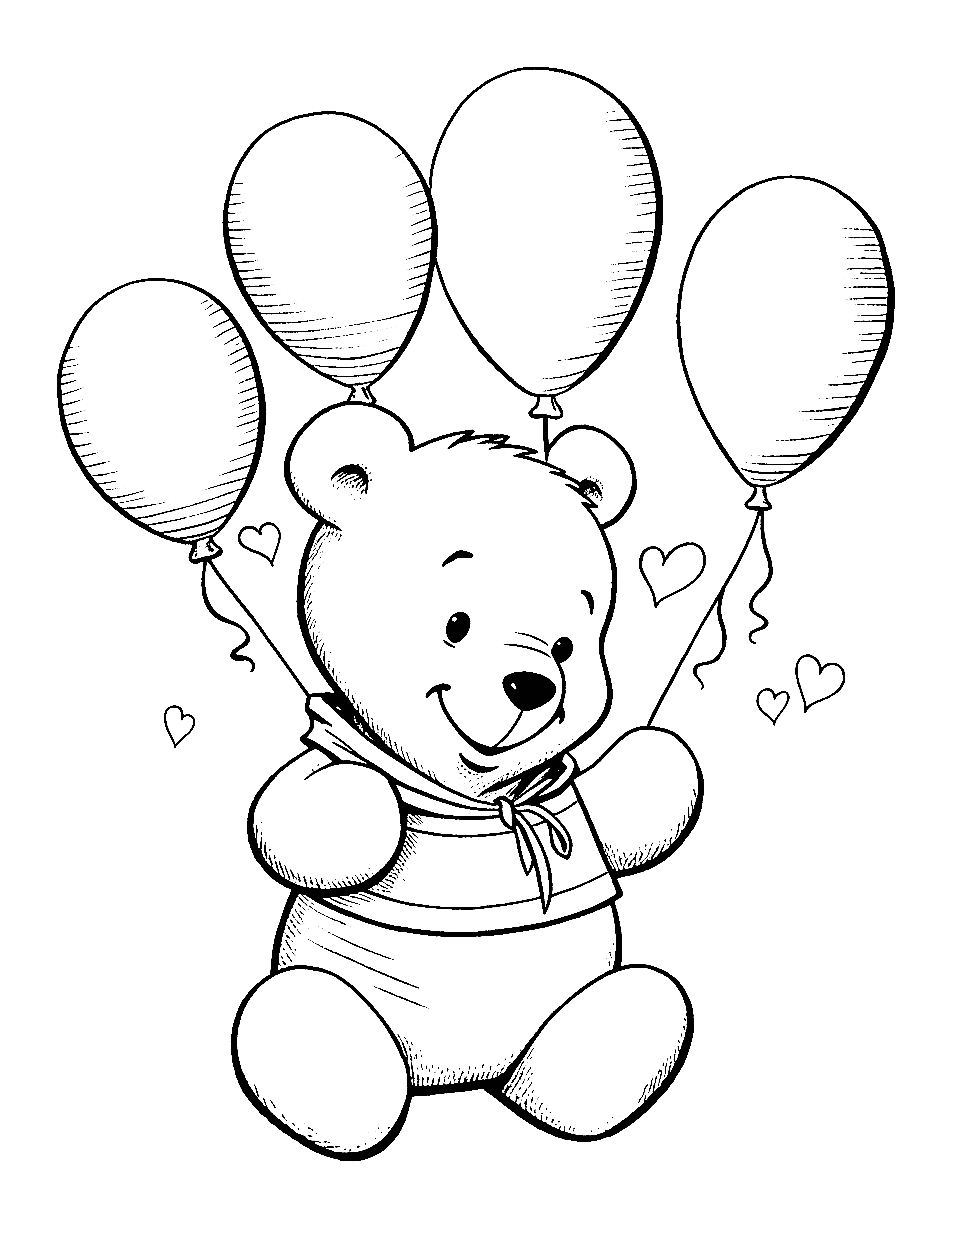 Valentine’s Day Hearts Coloring Page - Winnie the Pooh Bear with big balloons for Valentine’s celebration.